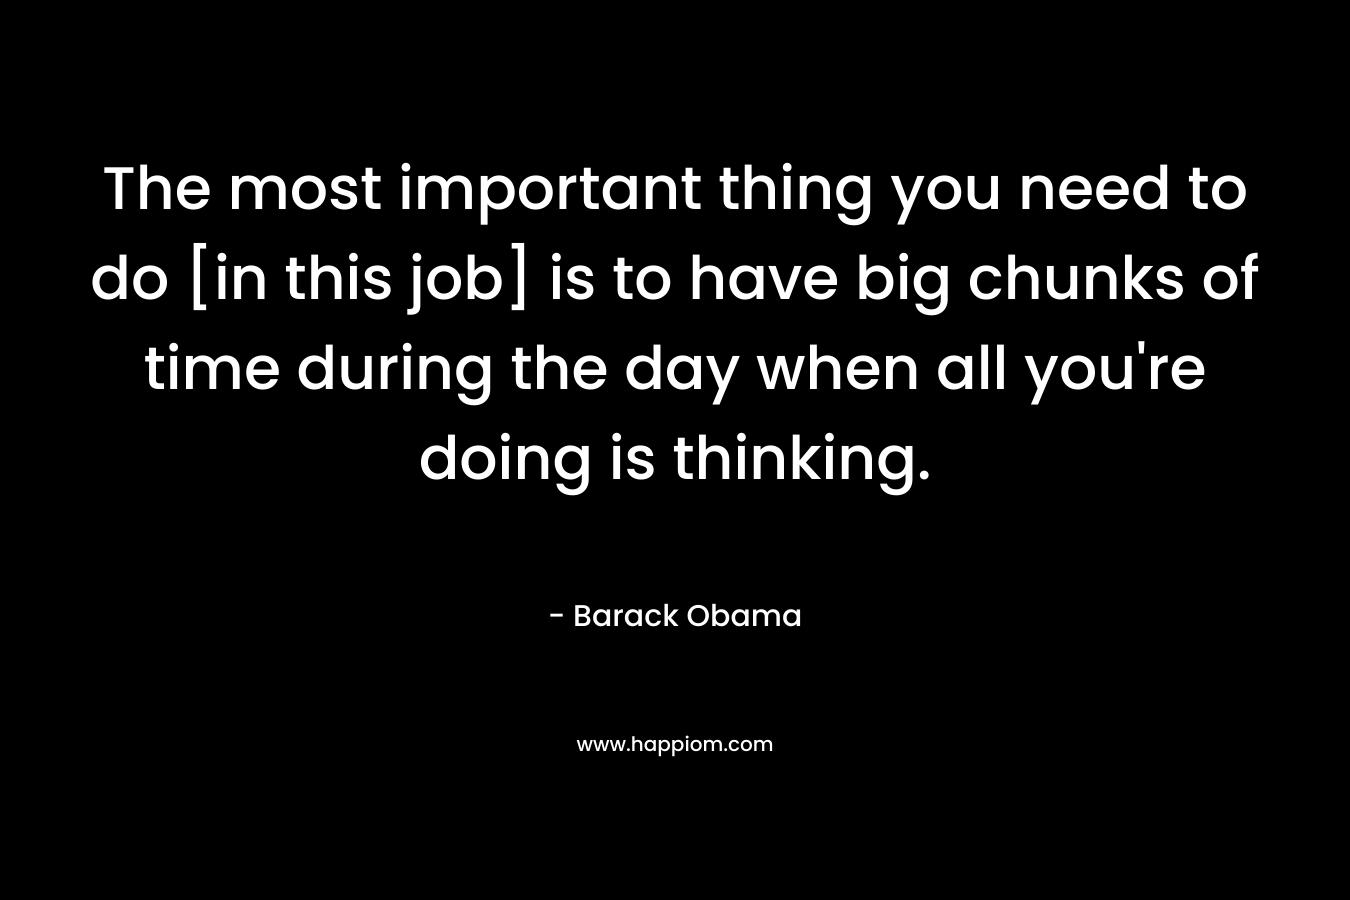 The most important thing you need to do [in this job] is to have big chunks of time during the day when all you’re doing is thinking. – Barack Obama